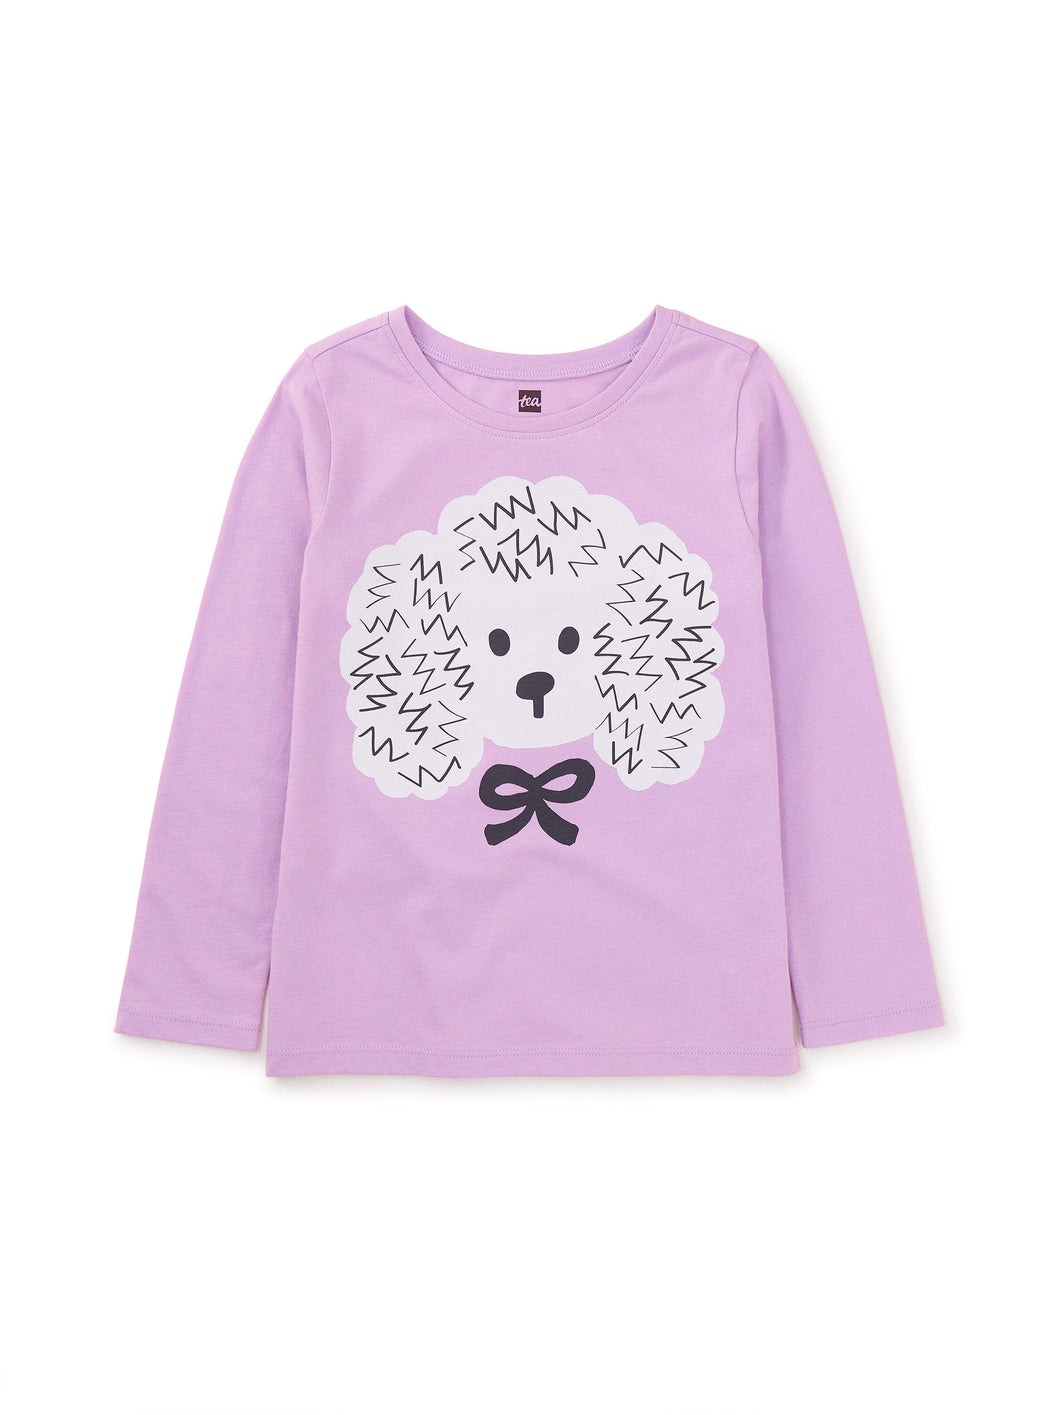 Poodle Double Sided Top 150 GIRLS APPAREL 2-8 Tea 2 